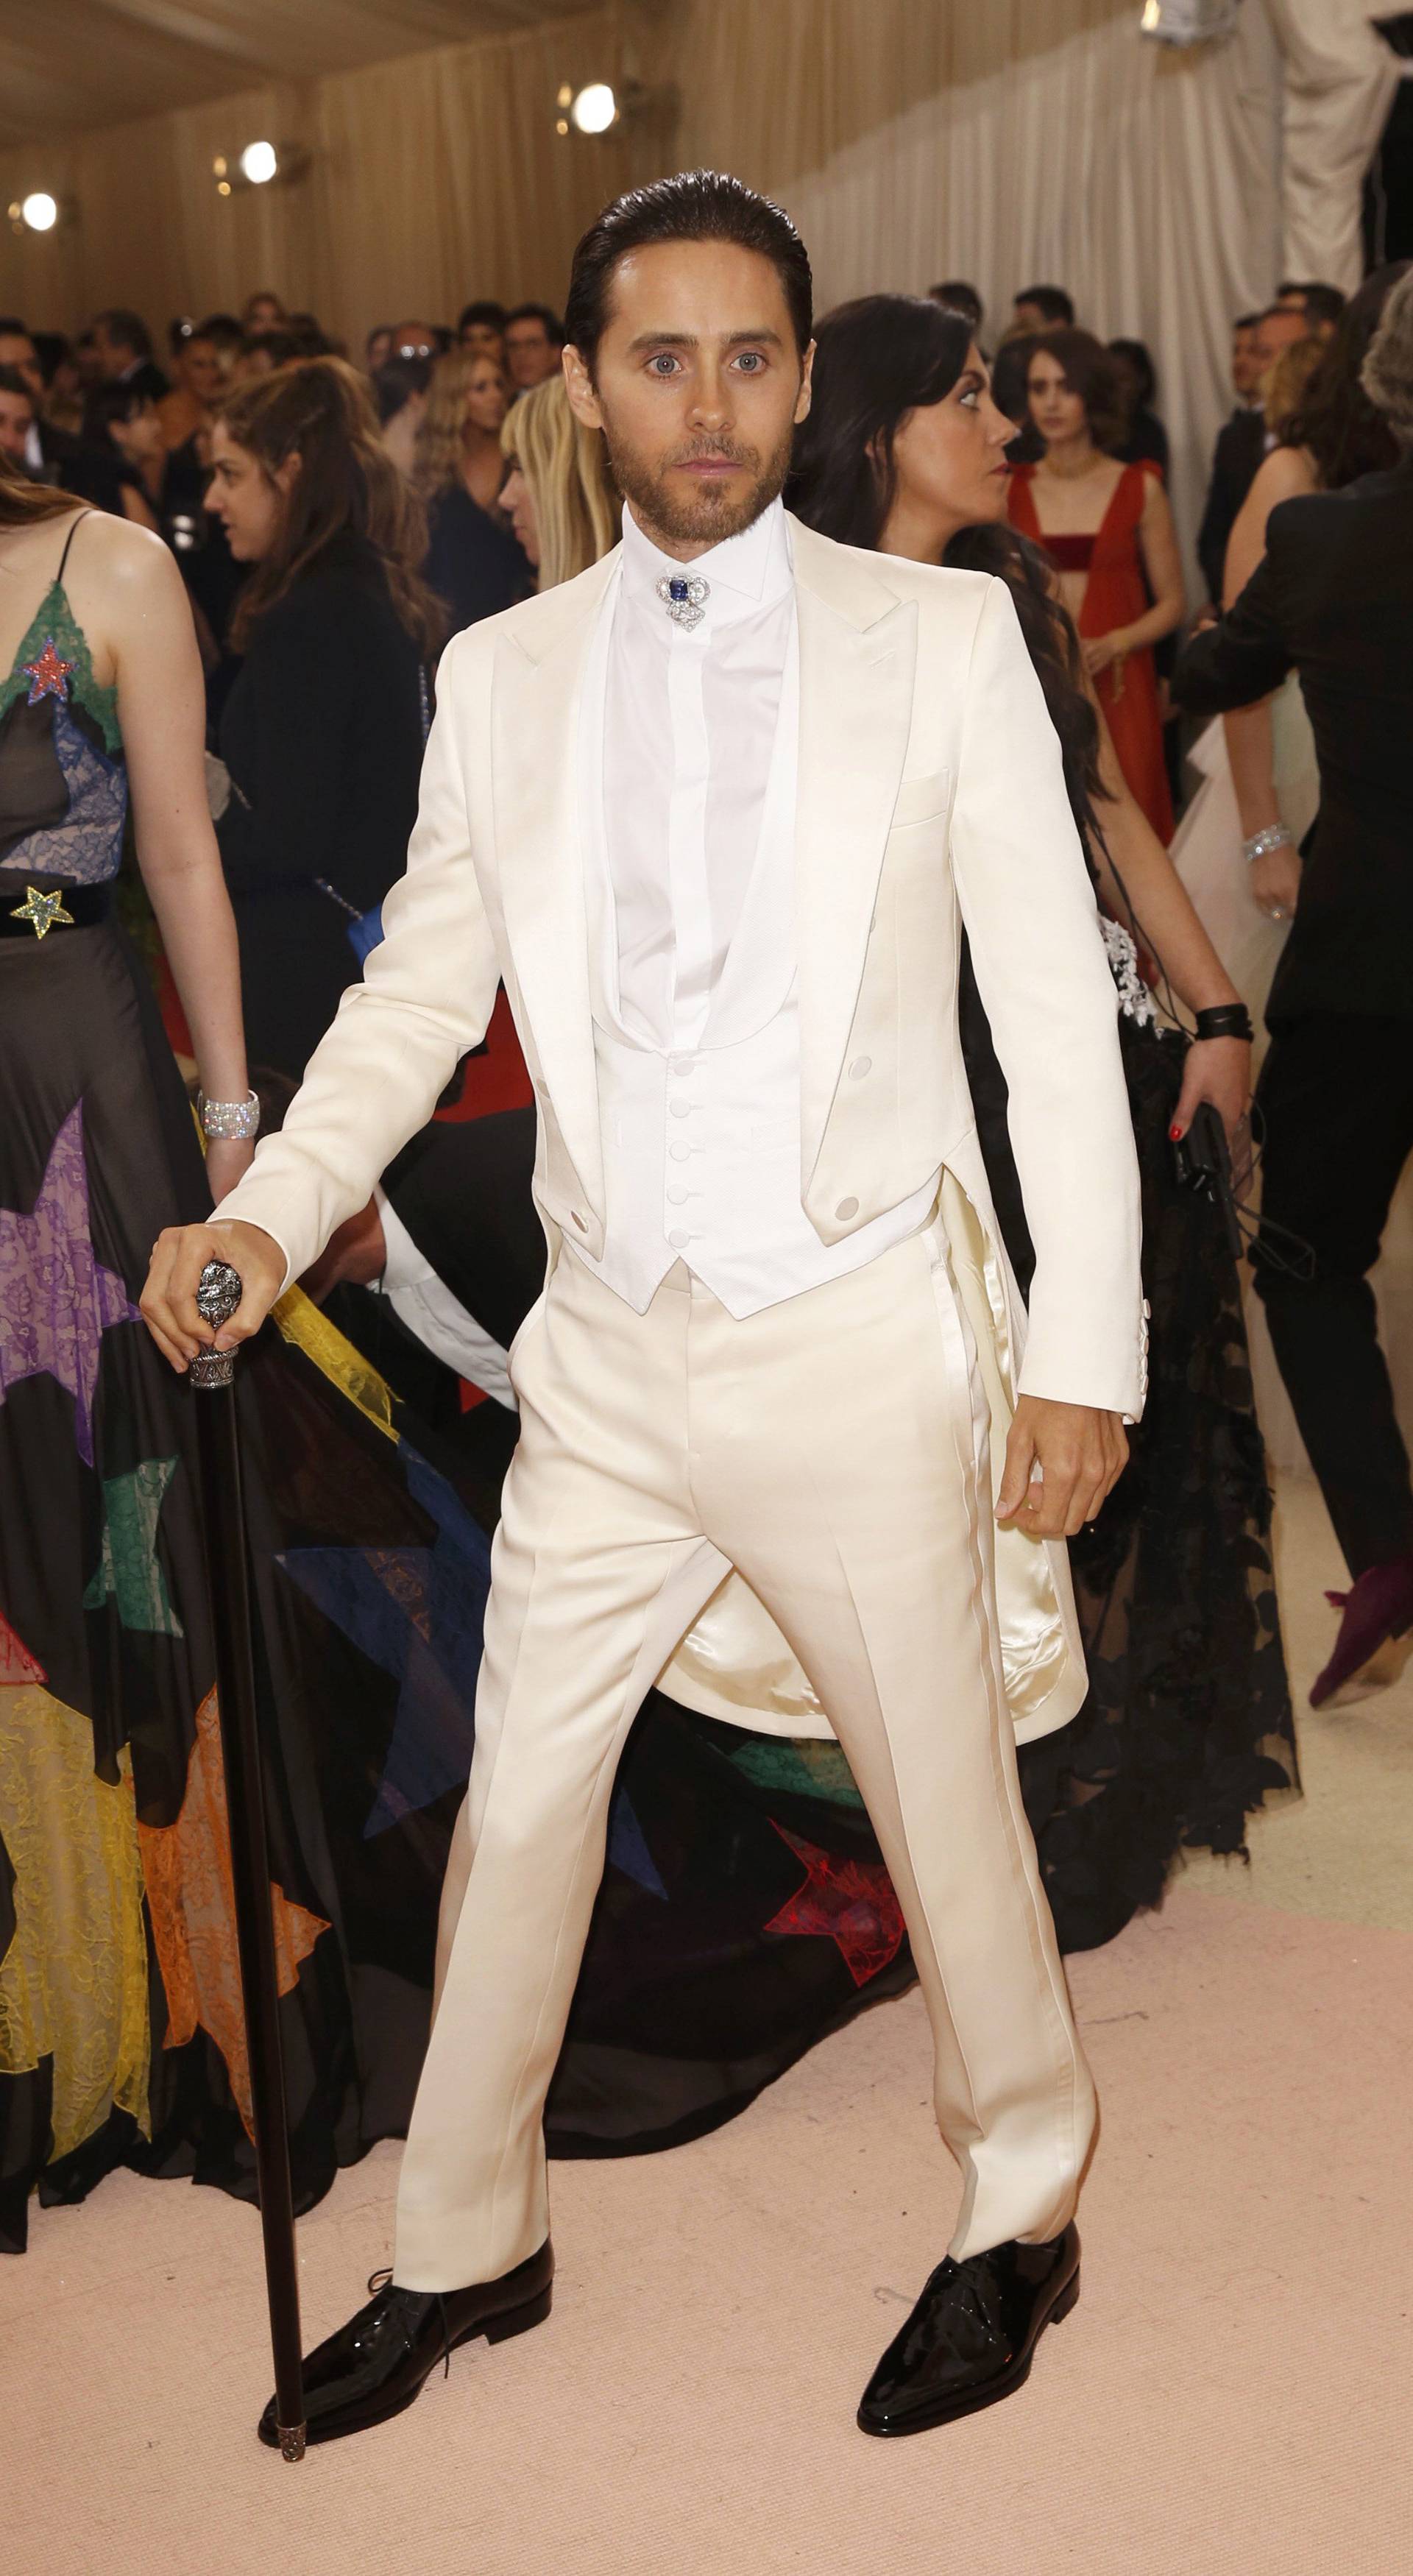 Actor Jared Leto arrives at the Met Gala in New York